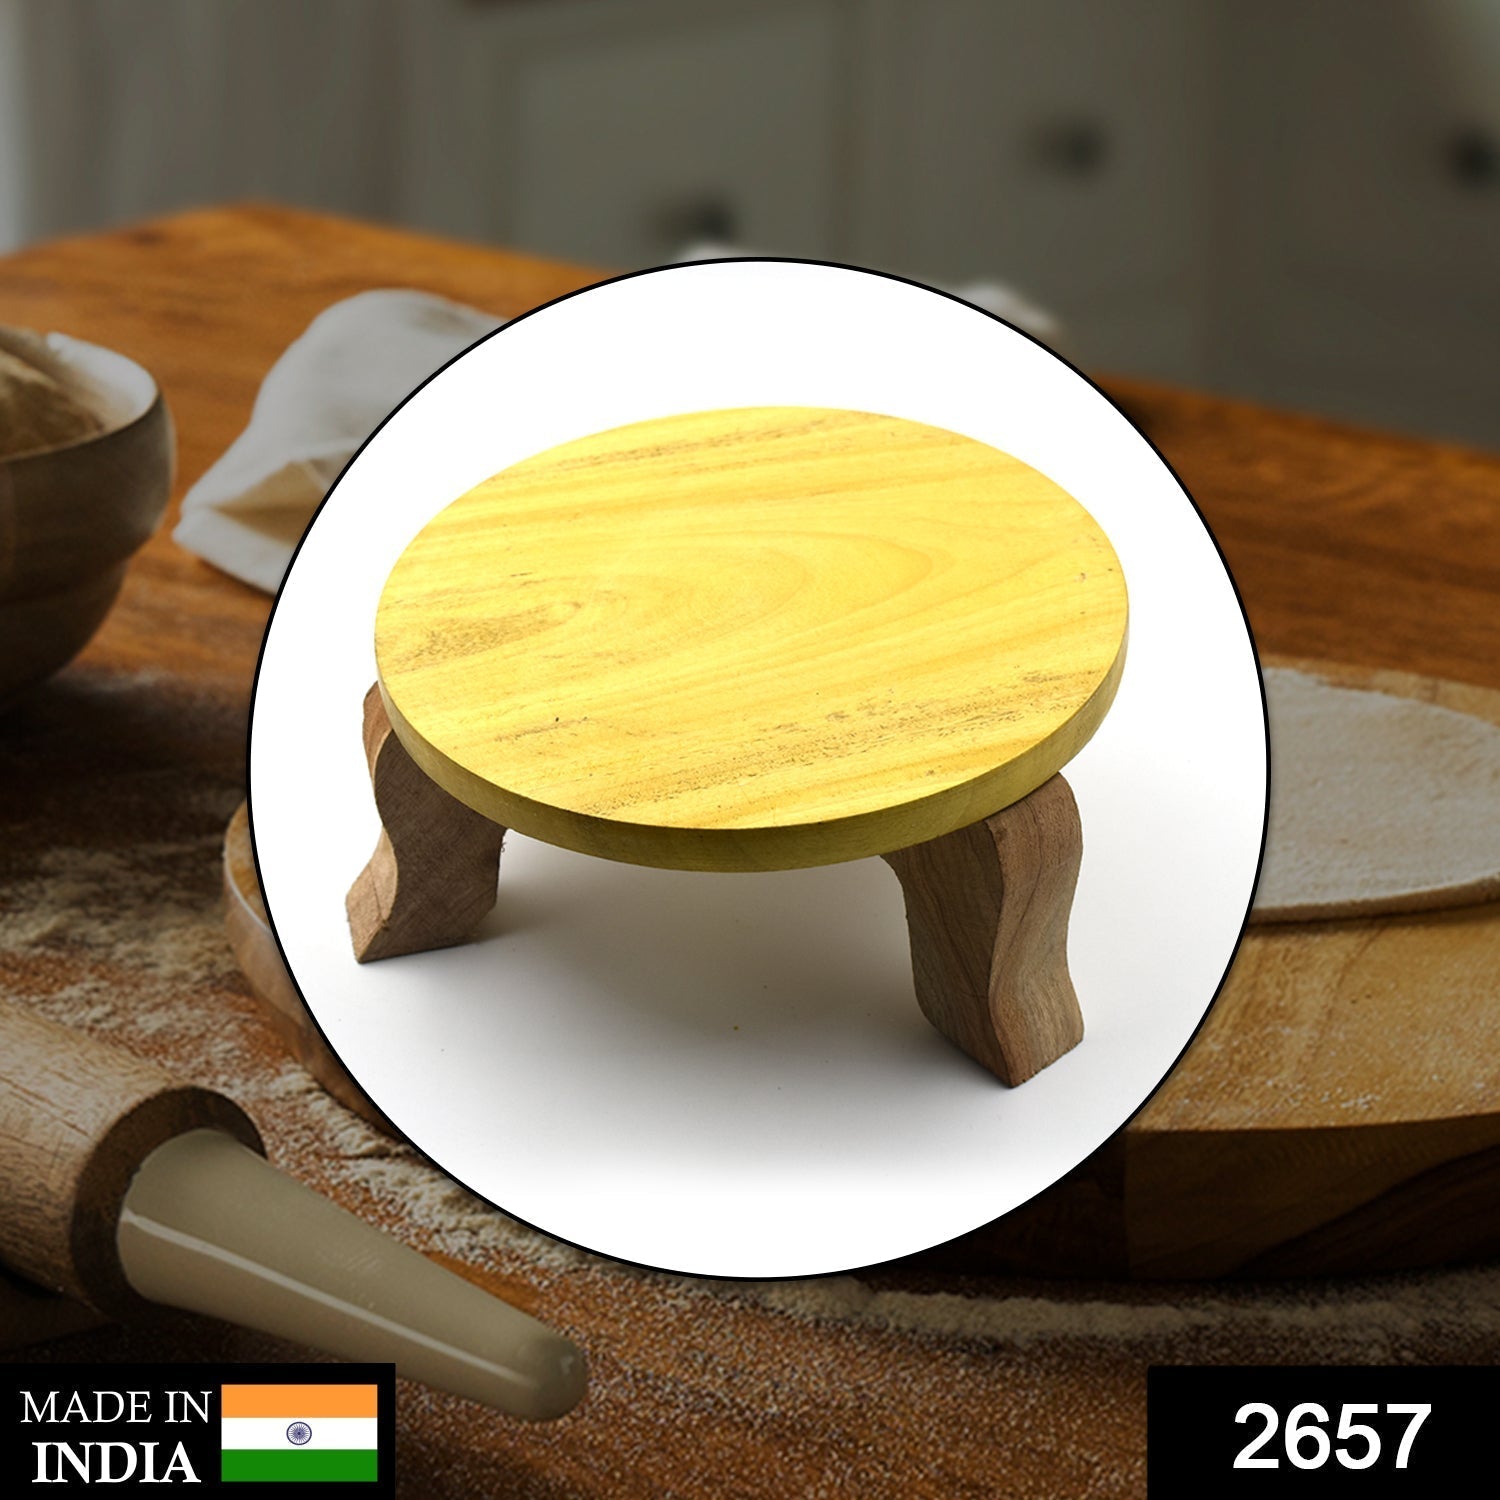 2657 Wooden Butcut Patala Used for Home Purposes Including Making Rotis Etc.